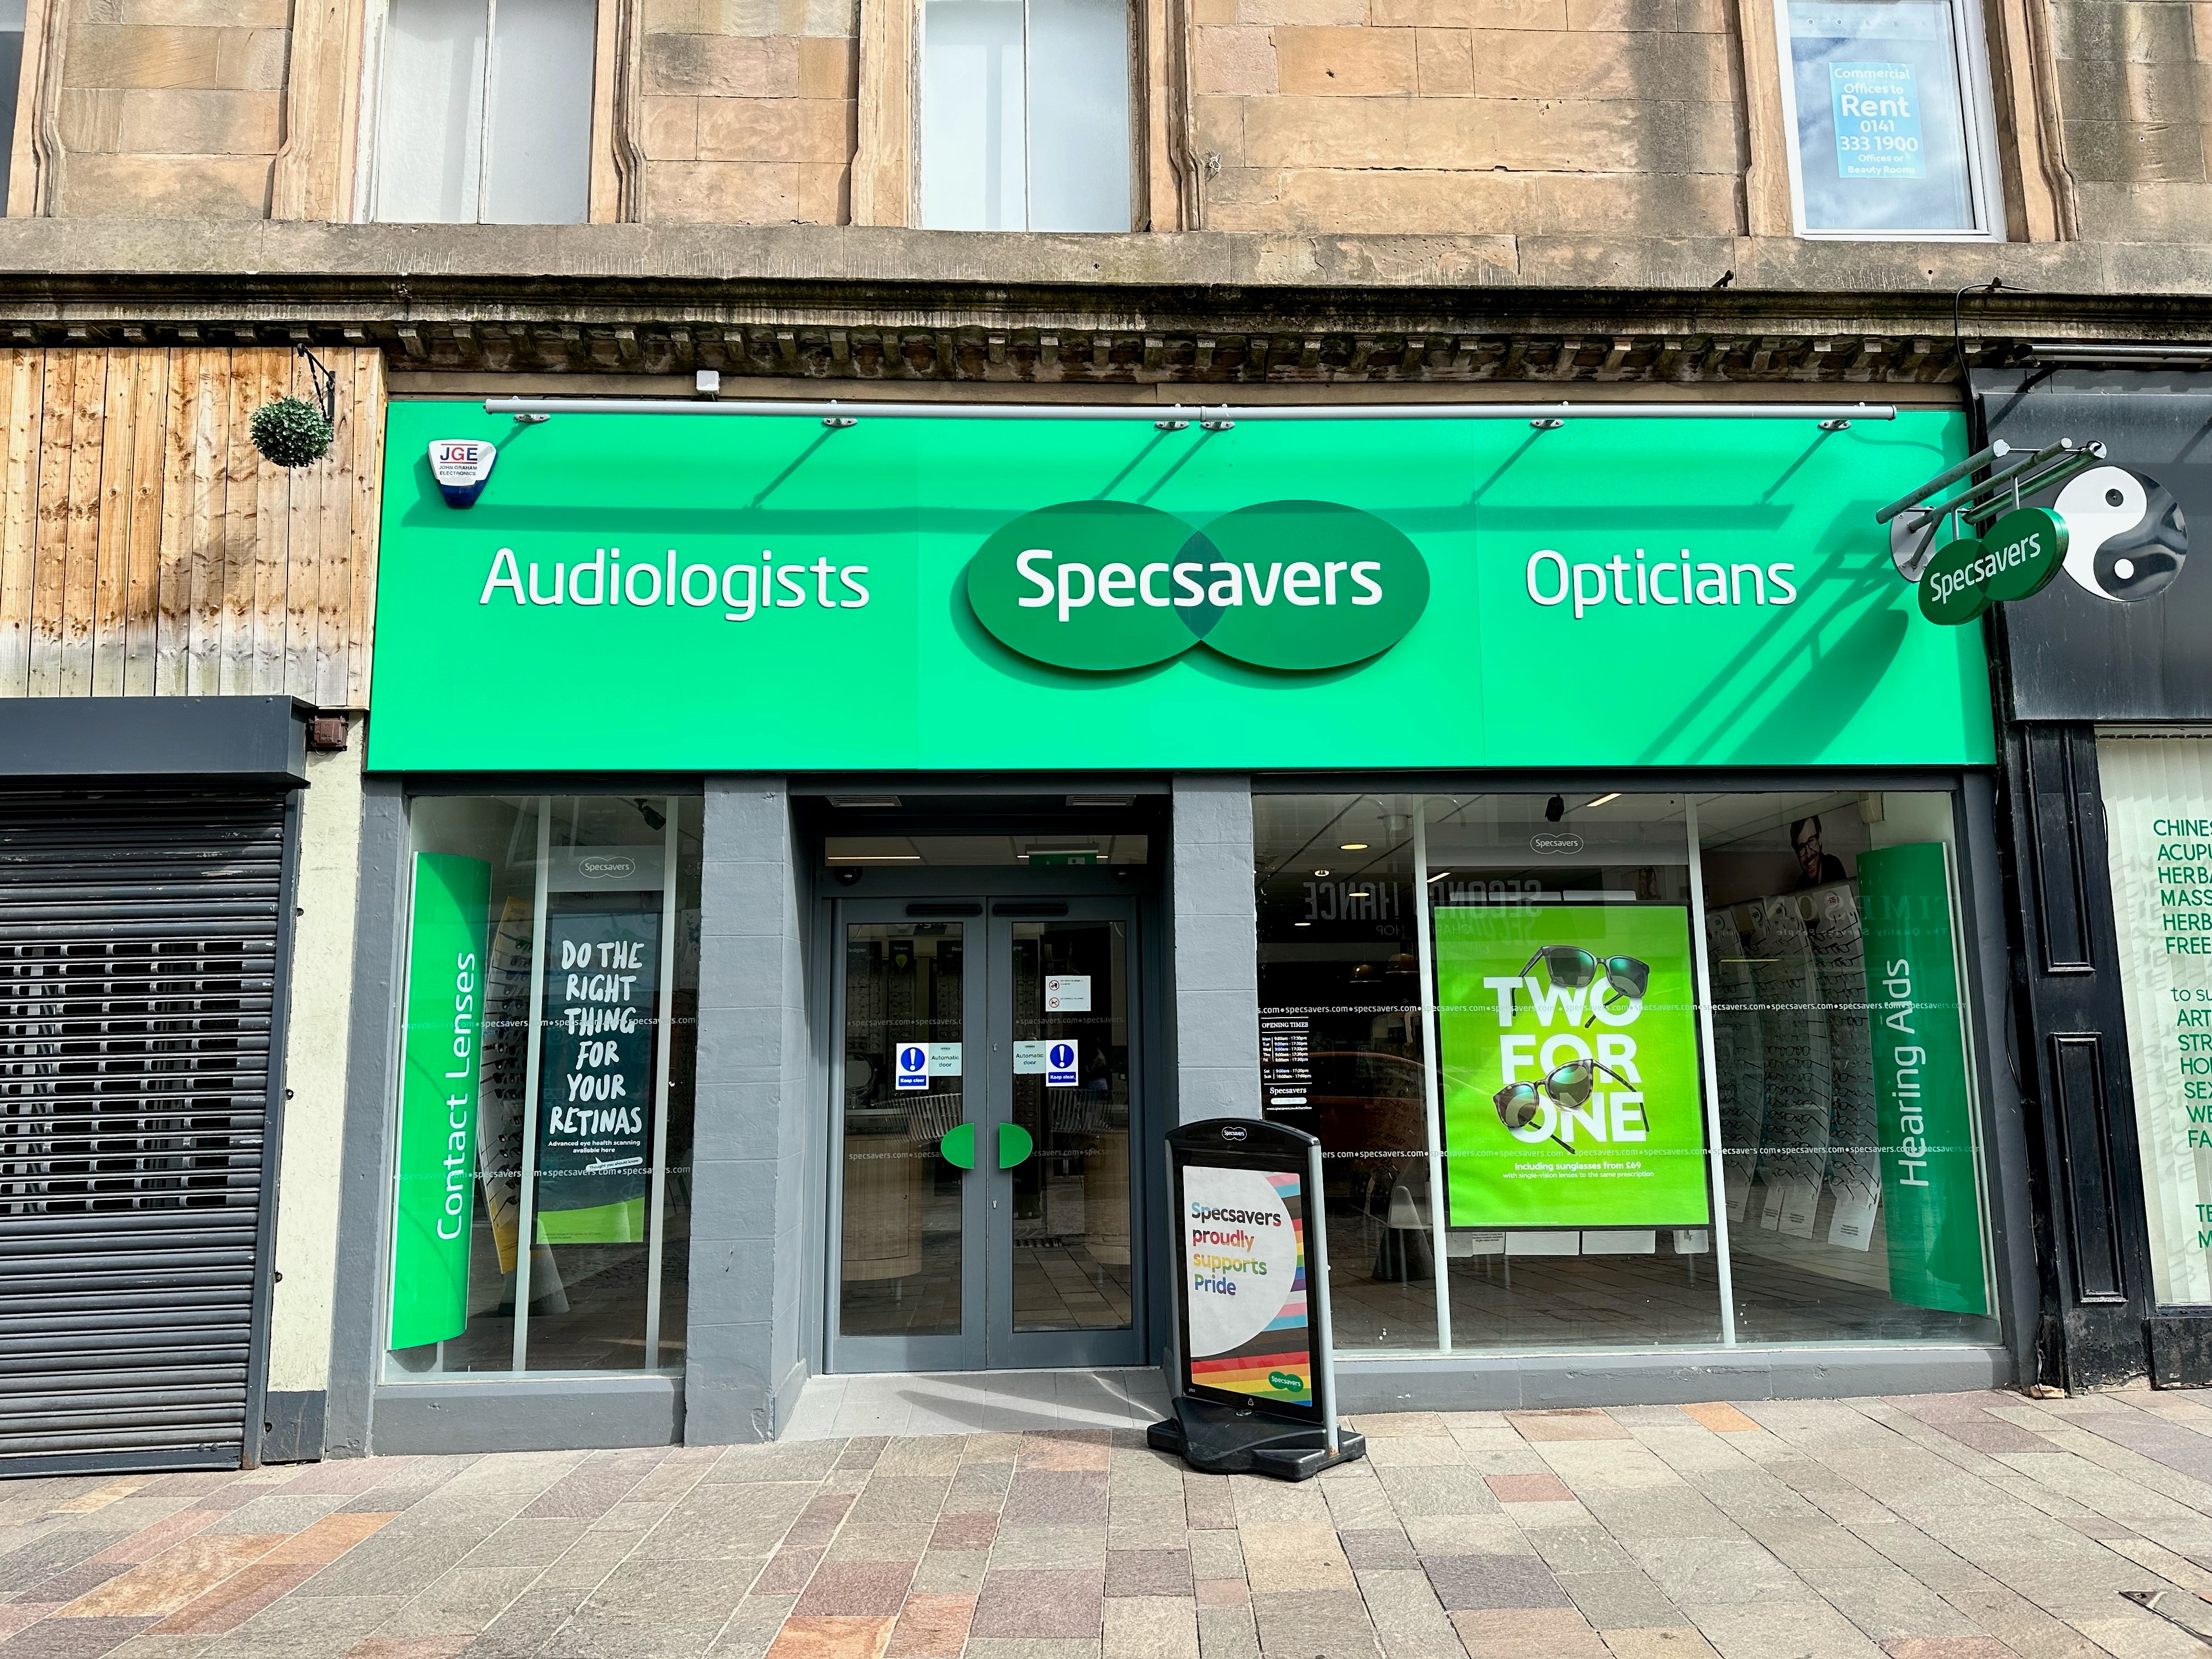 Images Specsavers Opticians and Audiologists - Hamilton